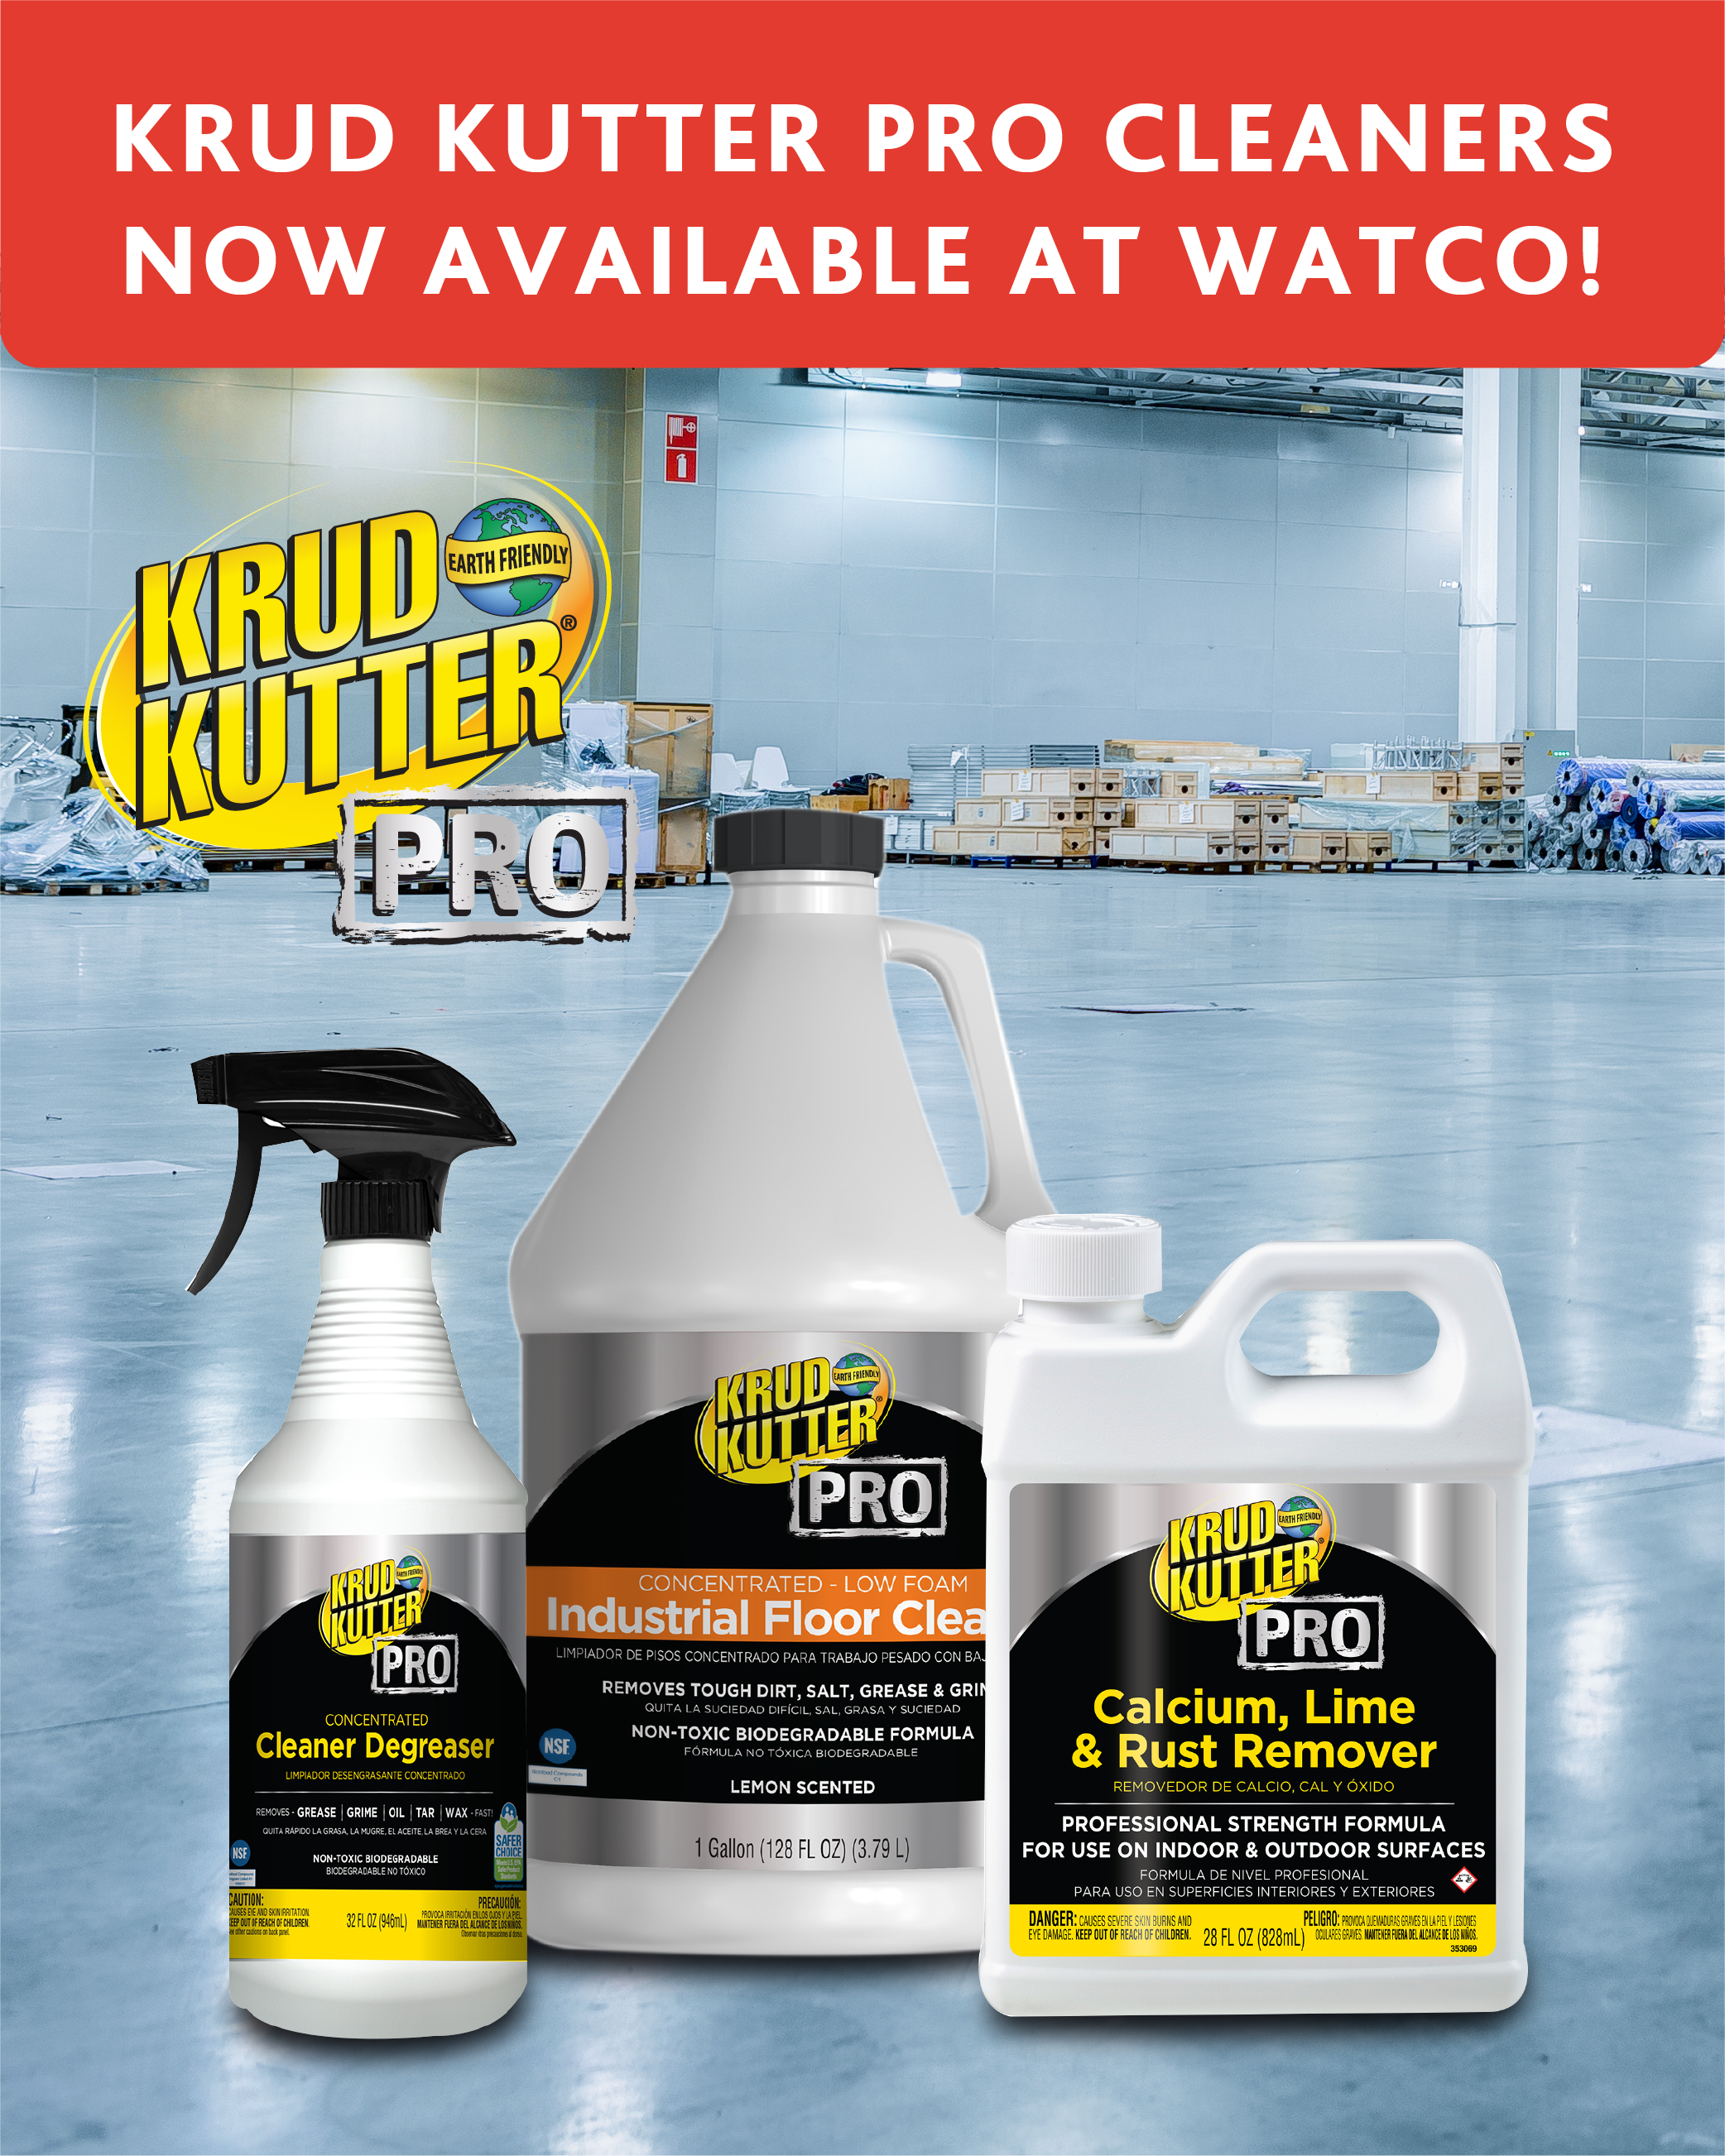 Heavy duty cleaners now available at Watco Floors. Make your facility maintenance cleaning plan PRO.